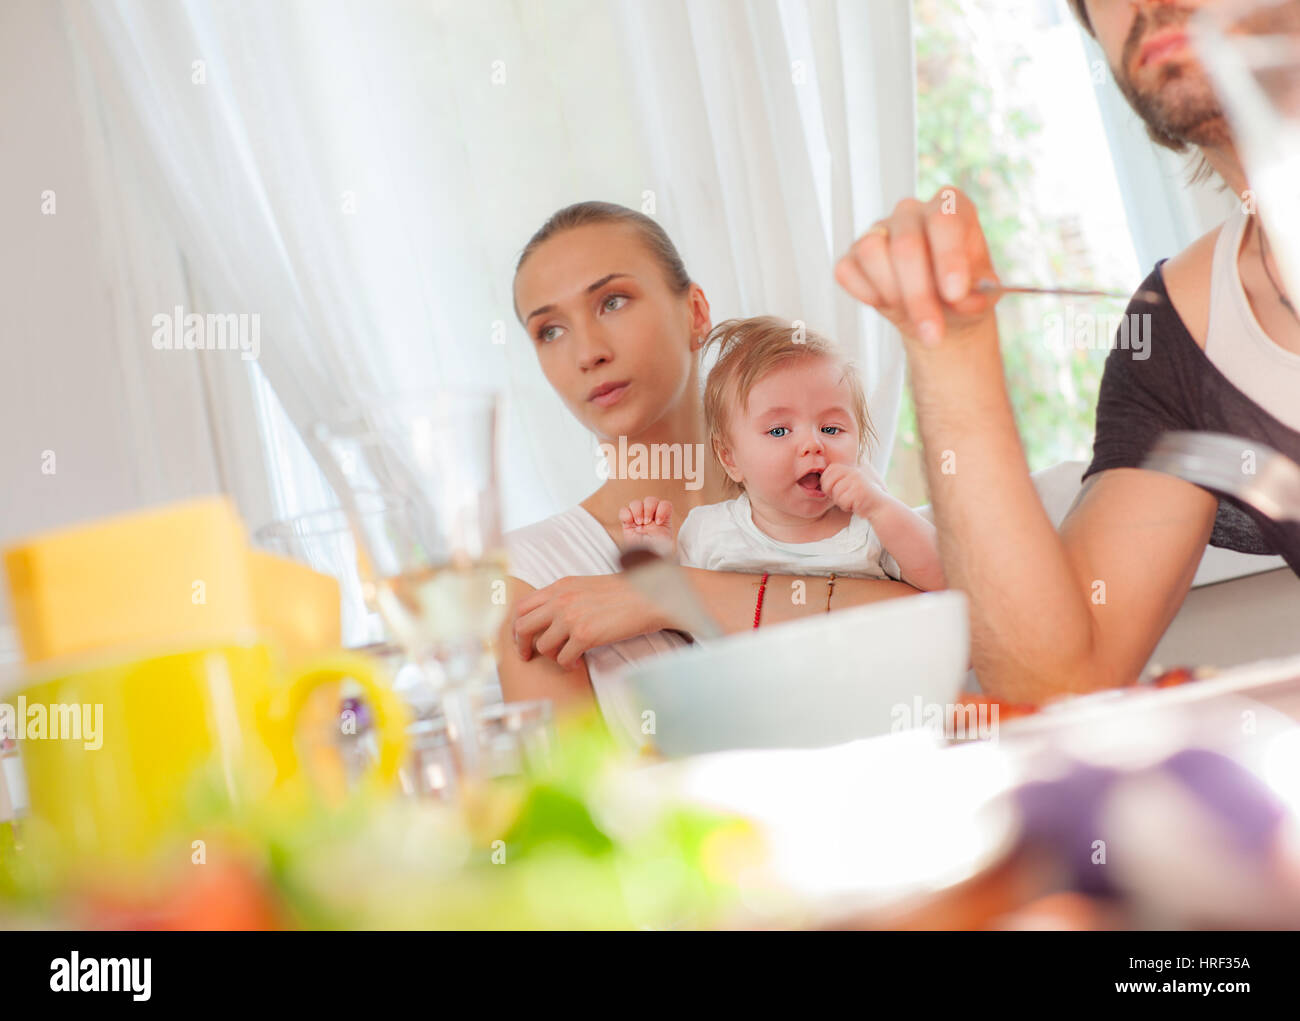 A little baby boy is held by his mother in restaurant during a family lunch. Stock Photo